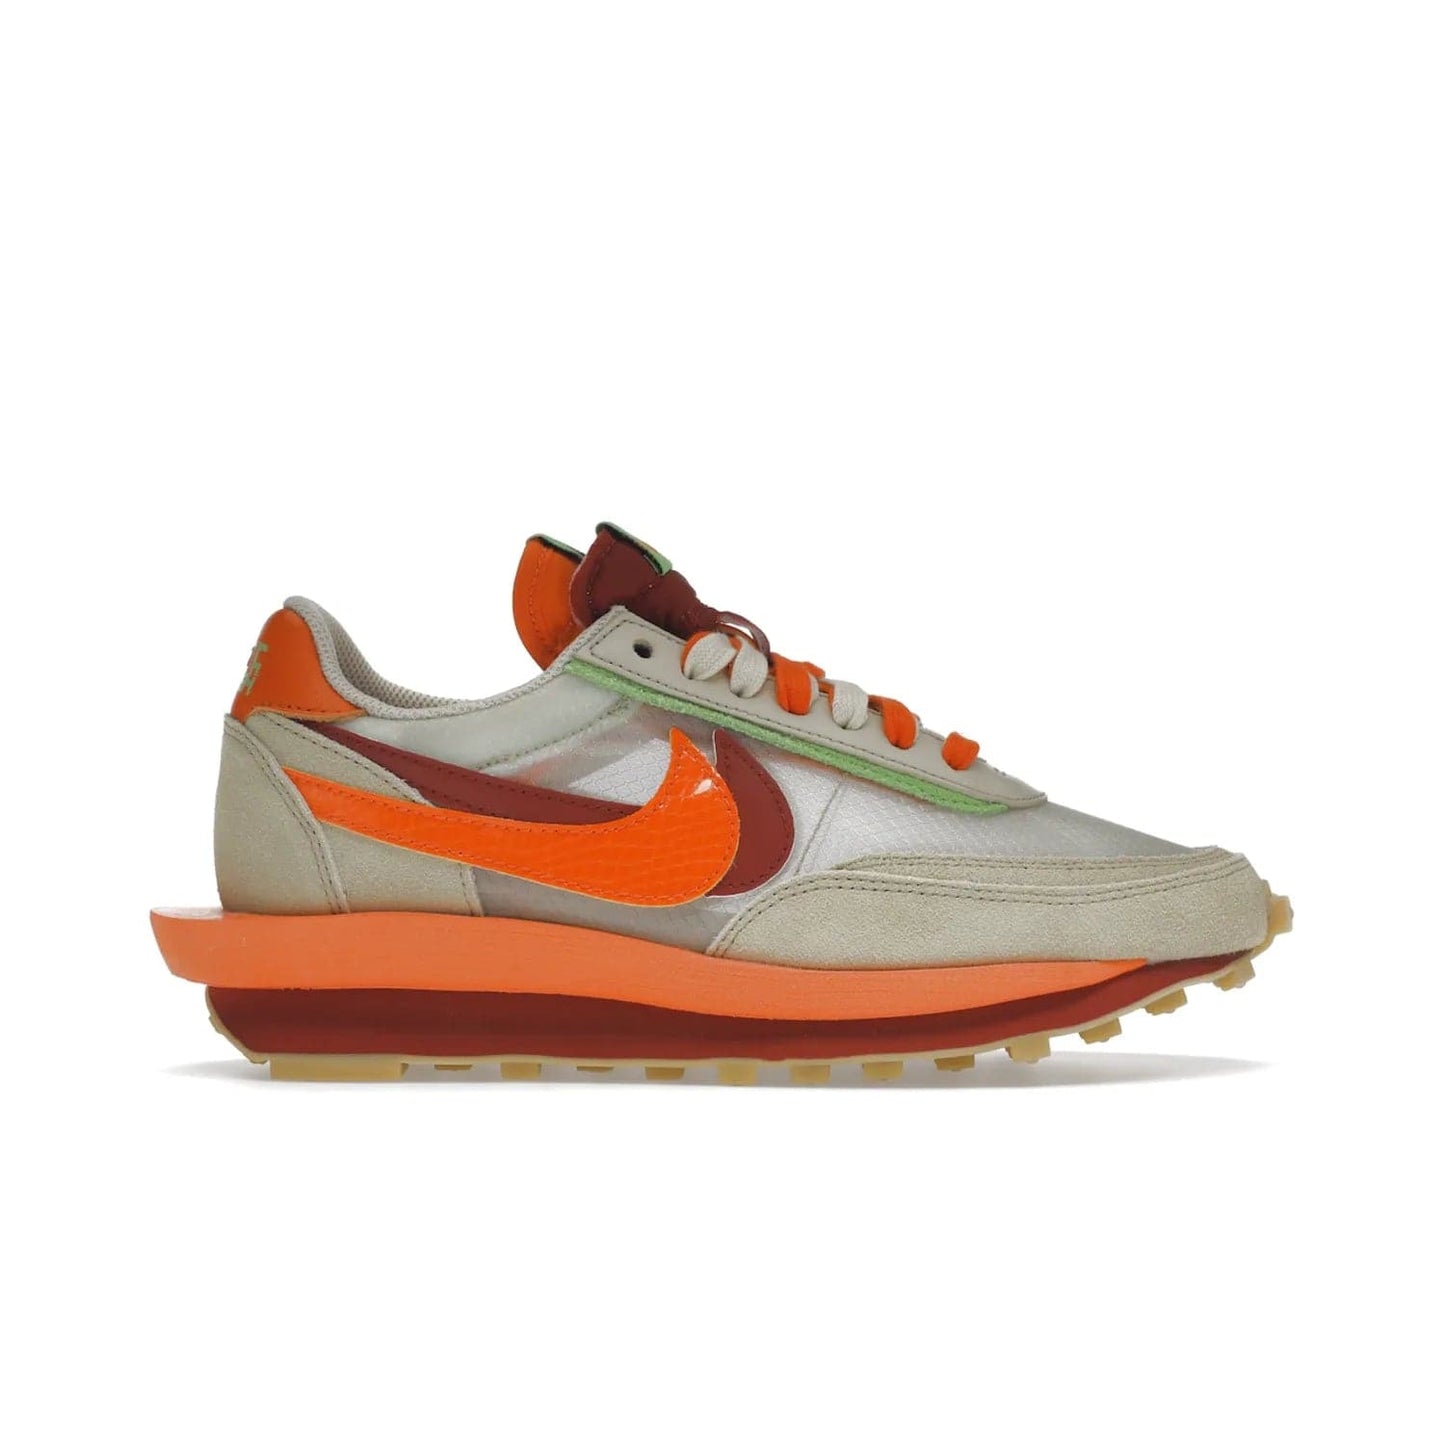 Nike LD Waffle sacai CLOT Kiss of Death Net Orange Blaze - Image 1 - Only at www.BallersClubKickz.com - A bold and stylish Nike LD Waffle sacai CLOT Kiss of Death Net Orange Blaze sneaker featuring a unique off-white, Deep Red & Orange Blaze Swooshes, two-toned stacked sole and doubled tongue. Available in September 2021. Make a statement.